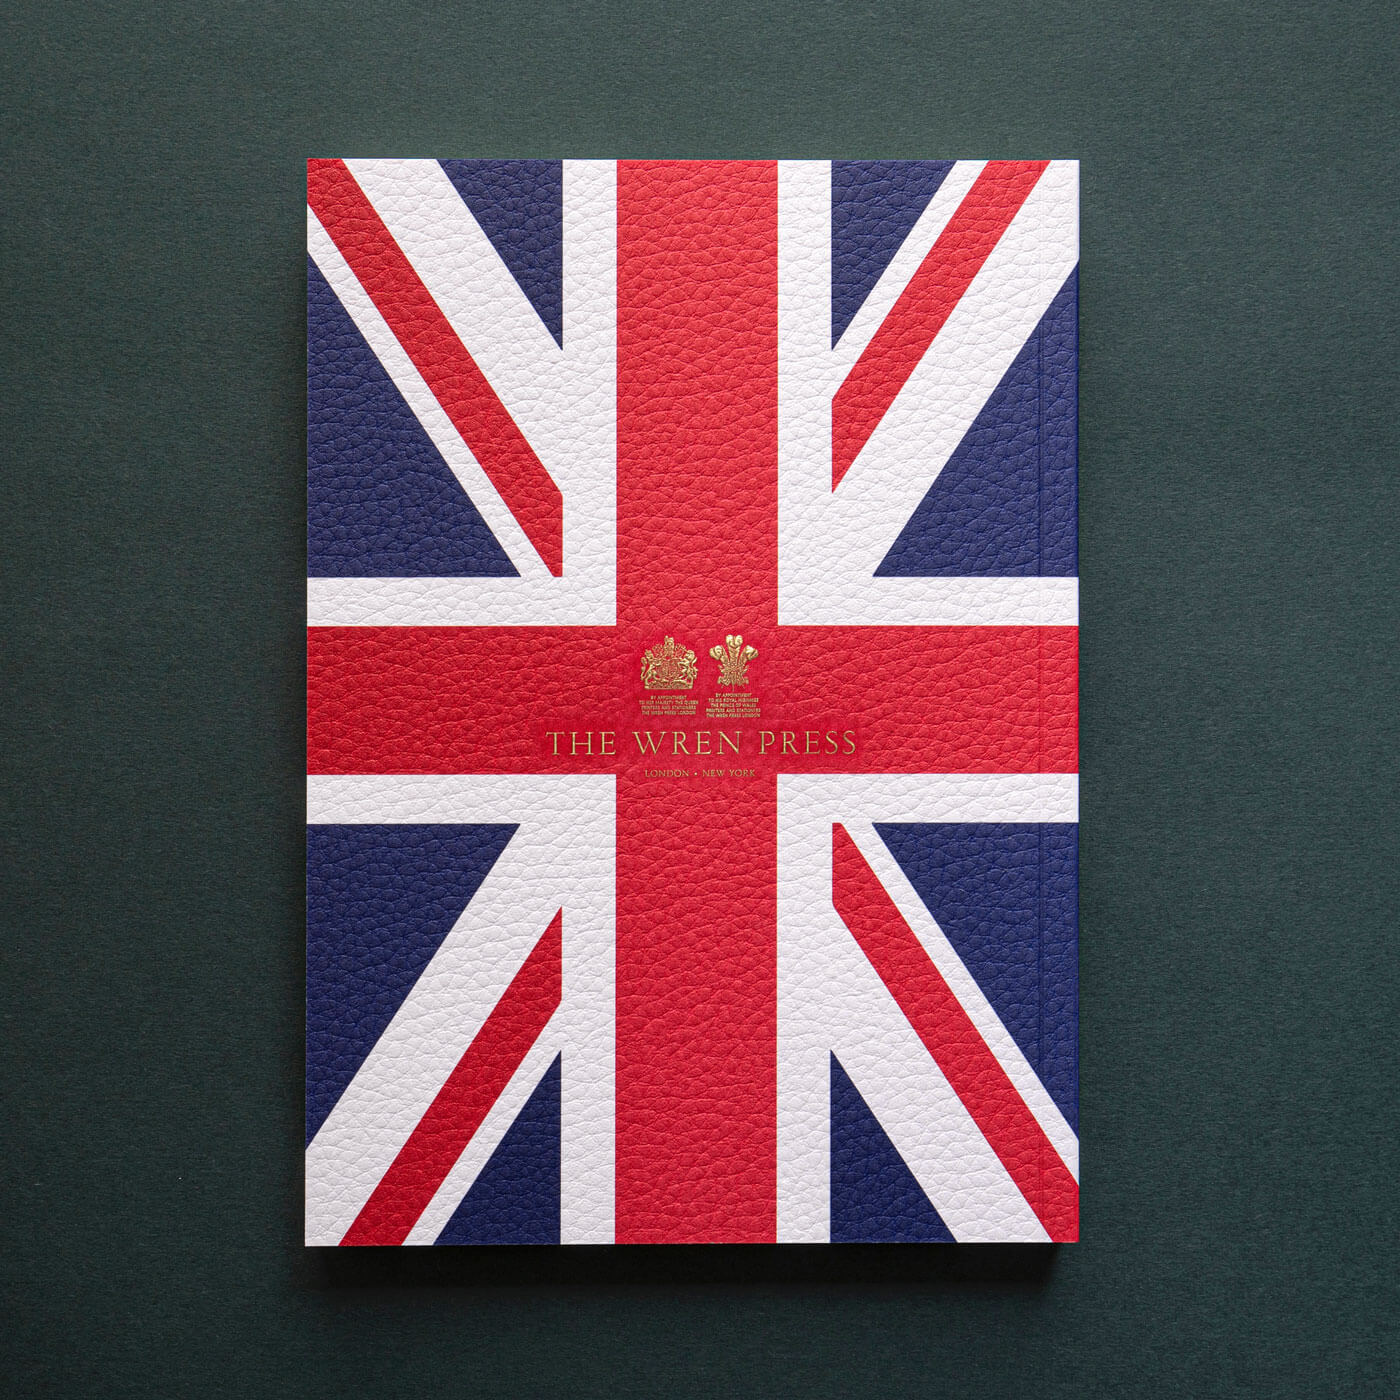 union jack red white and blue textured notebook gold engraved royal warrants